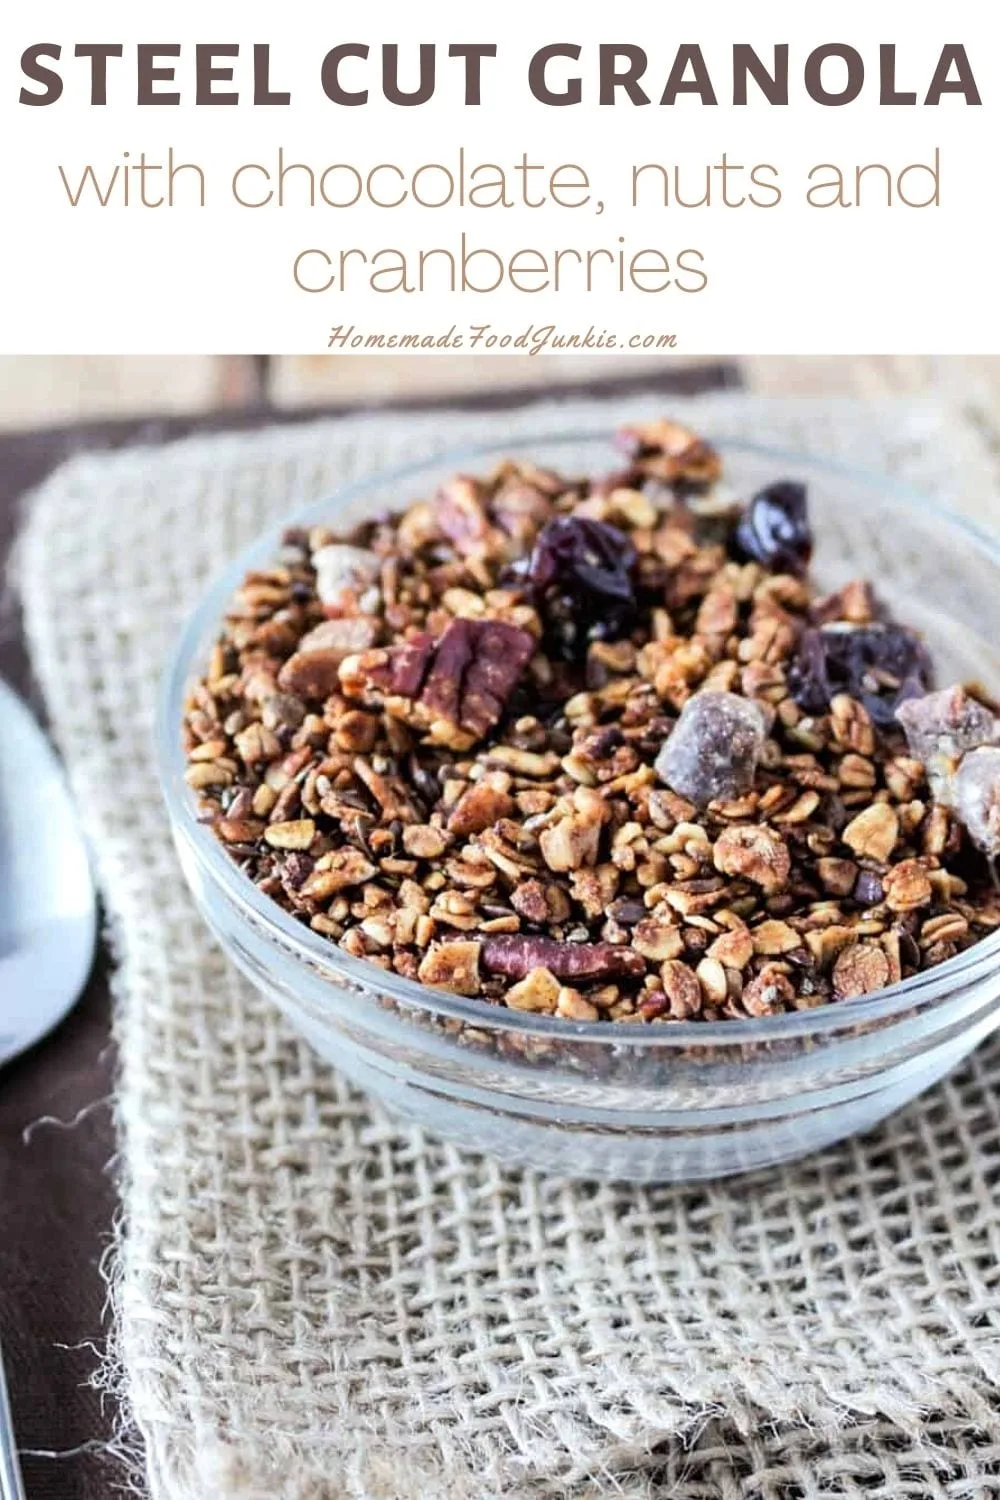 Steel Cut Granola With Chocolate, Nuts And Cranberries-Pin Image